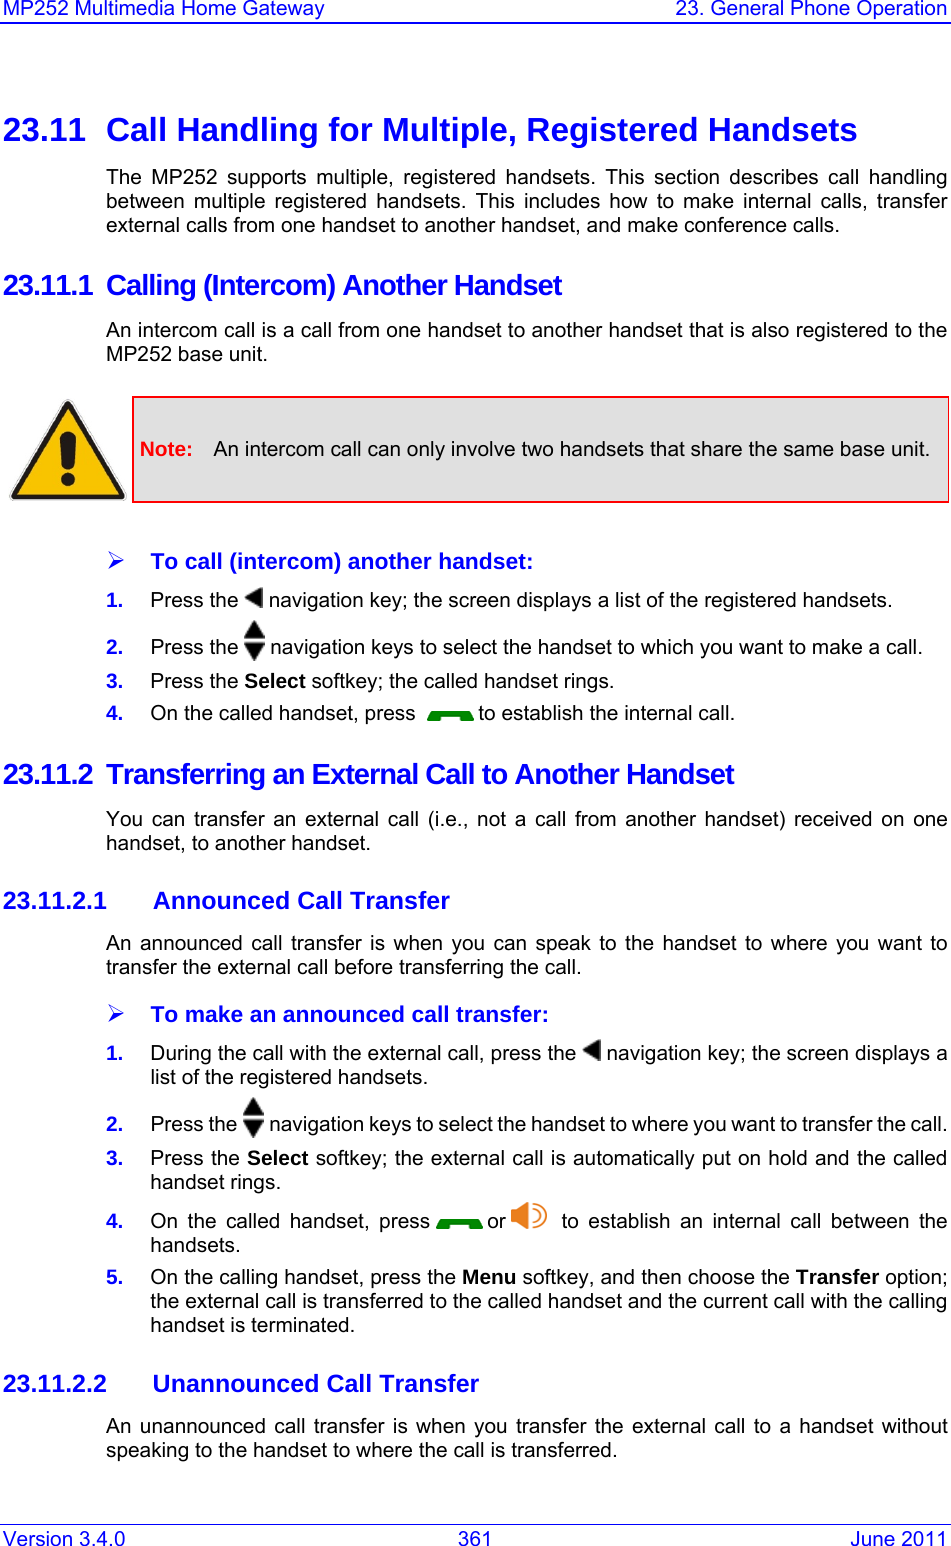 Version 3.4.0  361  June 2011 MP252 Multimedia Home Gateway  23. General Phone Operation  23.11  Call Handling for Multiple, Registered Handsets The MP252 supports multiple, registered handsets. This section describes call handling between multiple registered handsets. This includes how to make internal calls, transfer external calls from one handset to another handset, and make conference calls. 23.11.1 Calling (Intercom) Another Handset An intercom call is a call from one handset to another handset that is also registered to the MP252 base unit.   Note:  An intercom call can only involve two handsets that share the same base unit.  ¾ To call (intercom) another handset: 1.  Press the   navigation key; the screen displays a list of the registered handsets. 2.  Press the   navigation keys to select the handset to which you want to make a call. 3.  Press the Select softkey; the called handset rings. 4.  On the called handset, press    to establish the internal call. 23.11.2  Transferring an External Call to Another Handset You can transfer an external call (i.e., not a call from another handset) received on one handset, to another handset. 23.11.2.1  Announced Call Transfer An announced call transfer is when you can speak to the handset to where you want to transfer the external call before transferring the call. ¾ To make an announced call transfer: 1.  During the call with the external call, press the   navigation key; the screen displays a list of the registered handsets. 2.  Press the   navigation keys to select the handset to where you want to transfer the call. 3.  Press the Select softkey; the external call is automatically put on hold and the called handset rings. 4.  On the called handset, press   or    to establish an internal call between the handsets. 5.  On the calling handset, press the Menu softkey, and then choose the Transfer option; the external call is transferred to the called handset and the current call with the calling handset is terminated. 23.11.2.2  Unannounced Call Transfer An unannounced call transfer is when you transfer the external call to a handset without speaking to the handset to where the call is transferred. 